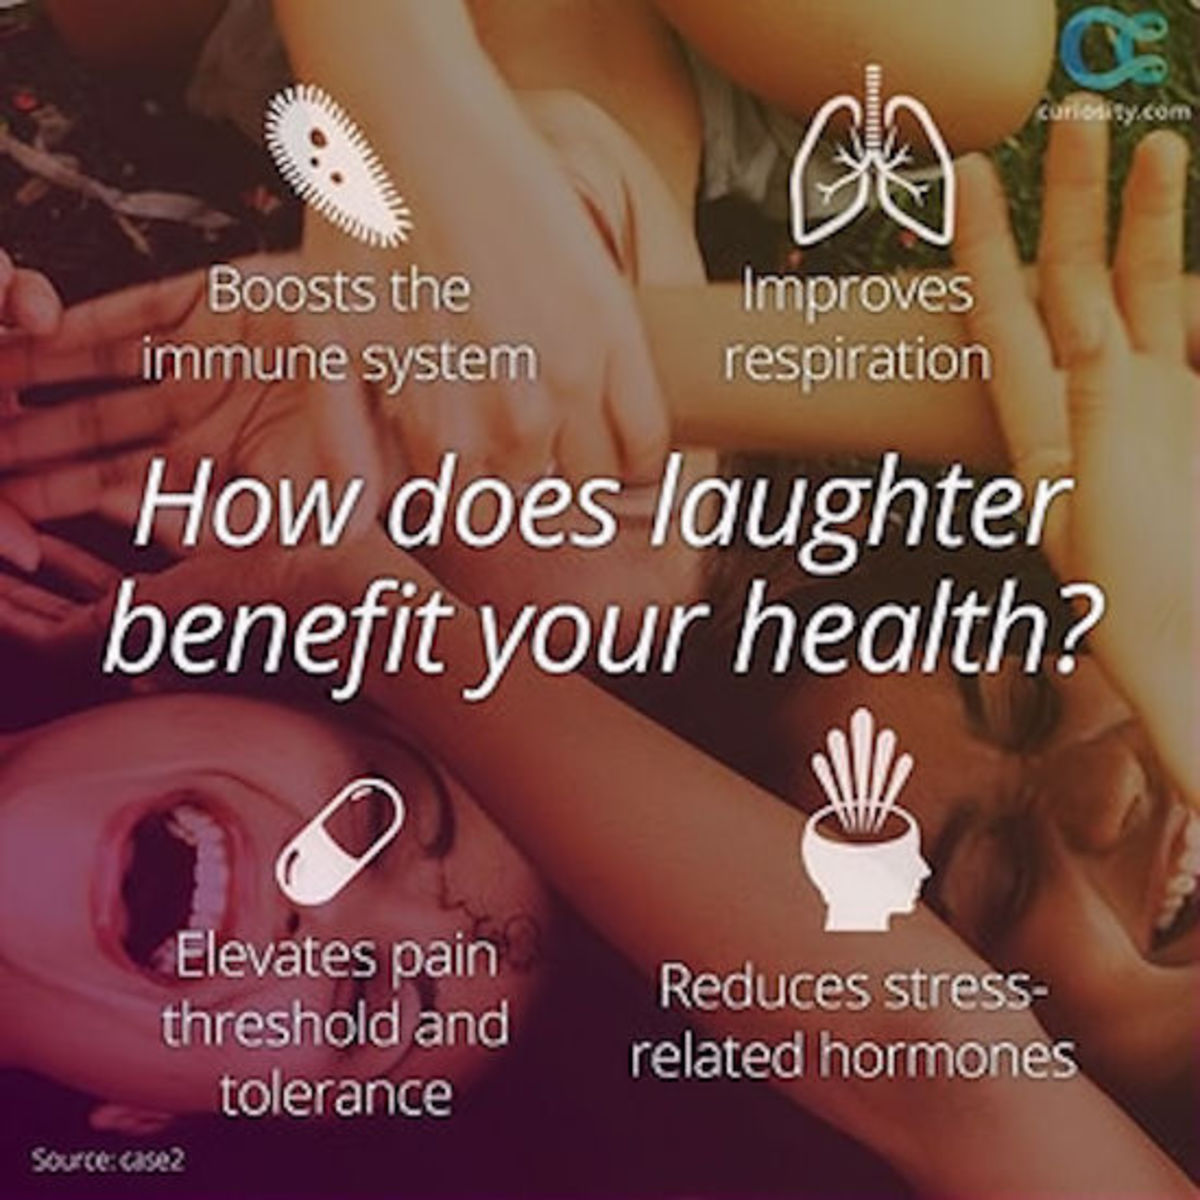 Laughter benefits your nhealth